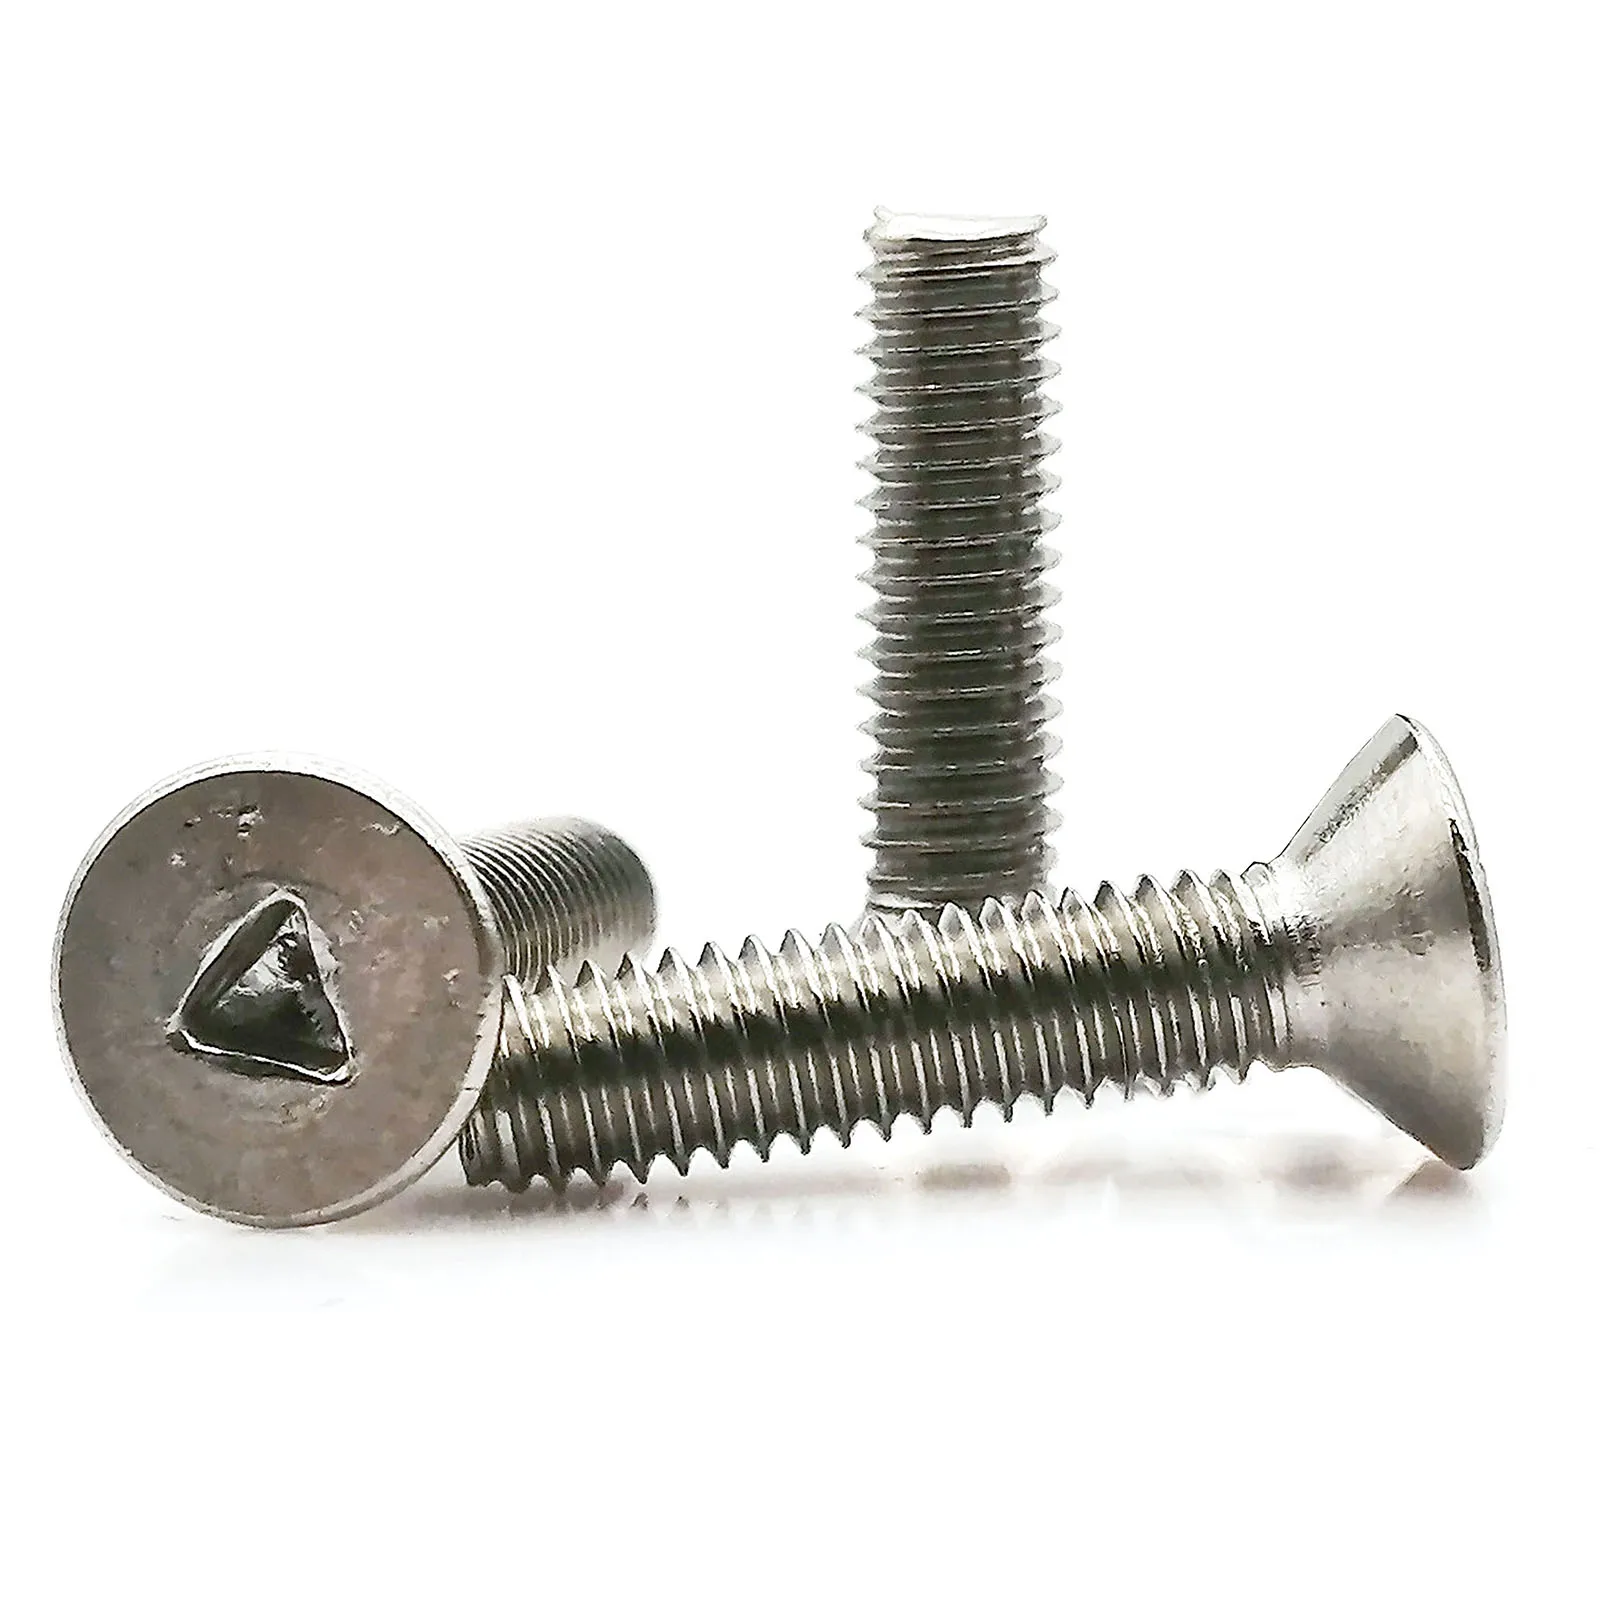 

20pcs M2 M3 M4 A2-70 304 Stainless Steel Triangle Socket Triangular Slotted Flat Countersunk Head Security Bolt Screw